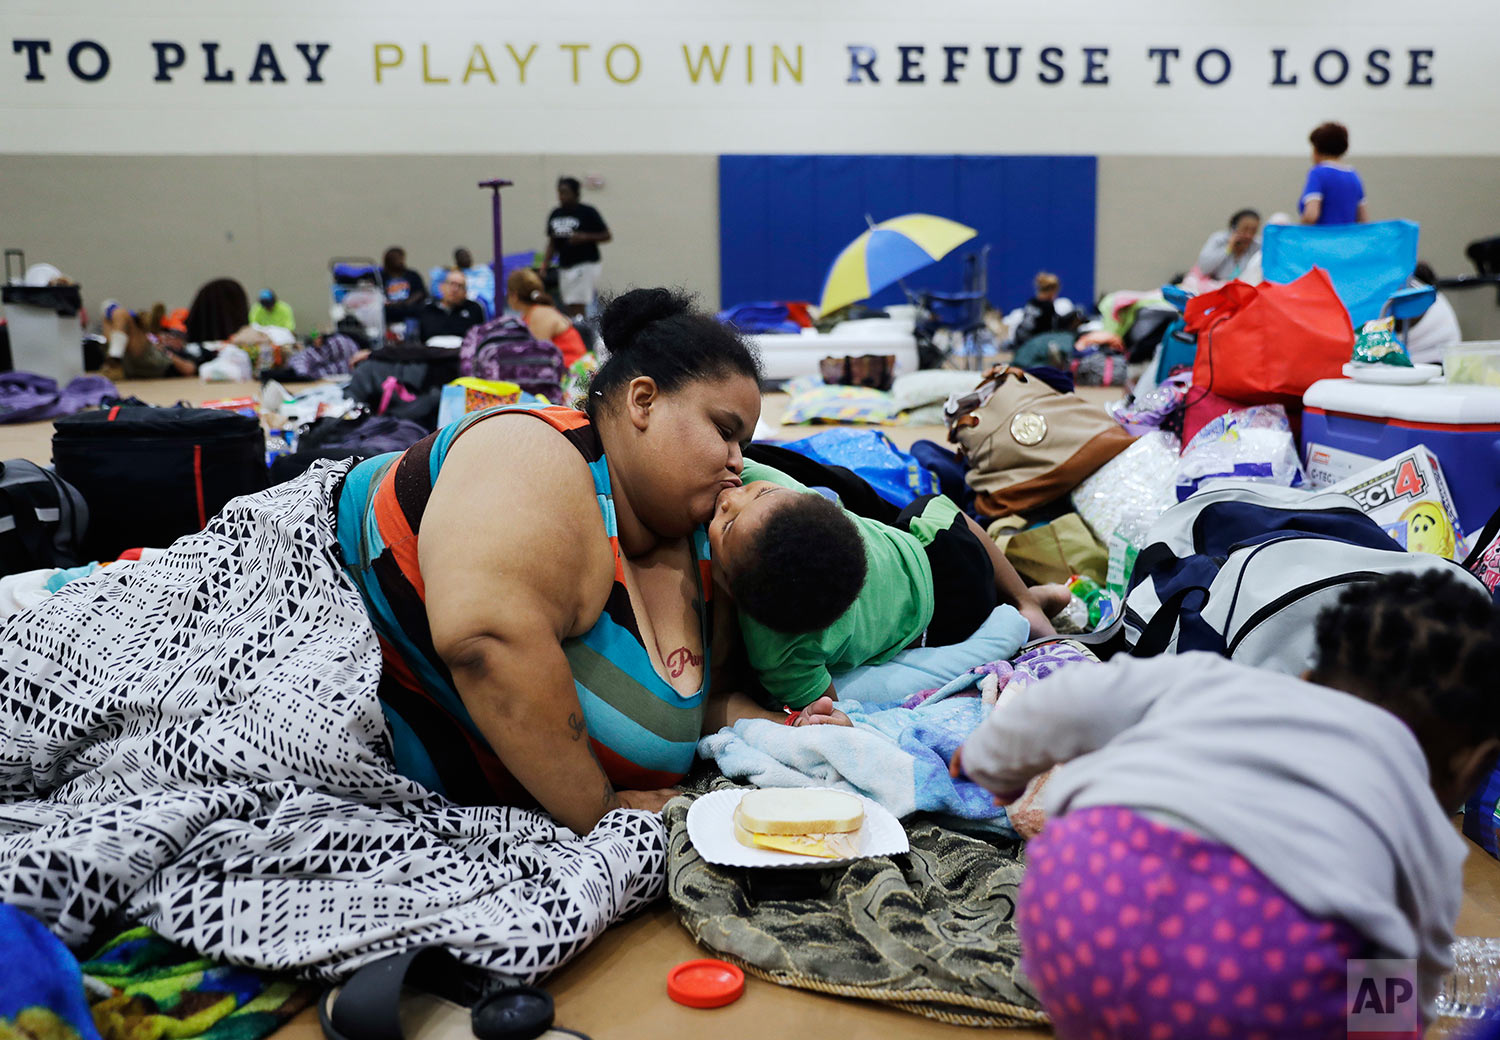  Annette Davis kisses her son Darius, 3, while staying at a shelter in Miami after evacuating from their home in Florida City, Fla., ahead of Hurricane Irma Saturday, Sept. 9, 2017. (AP Photo/David Goldman) 